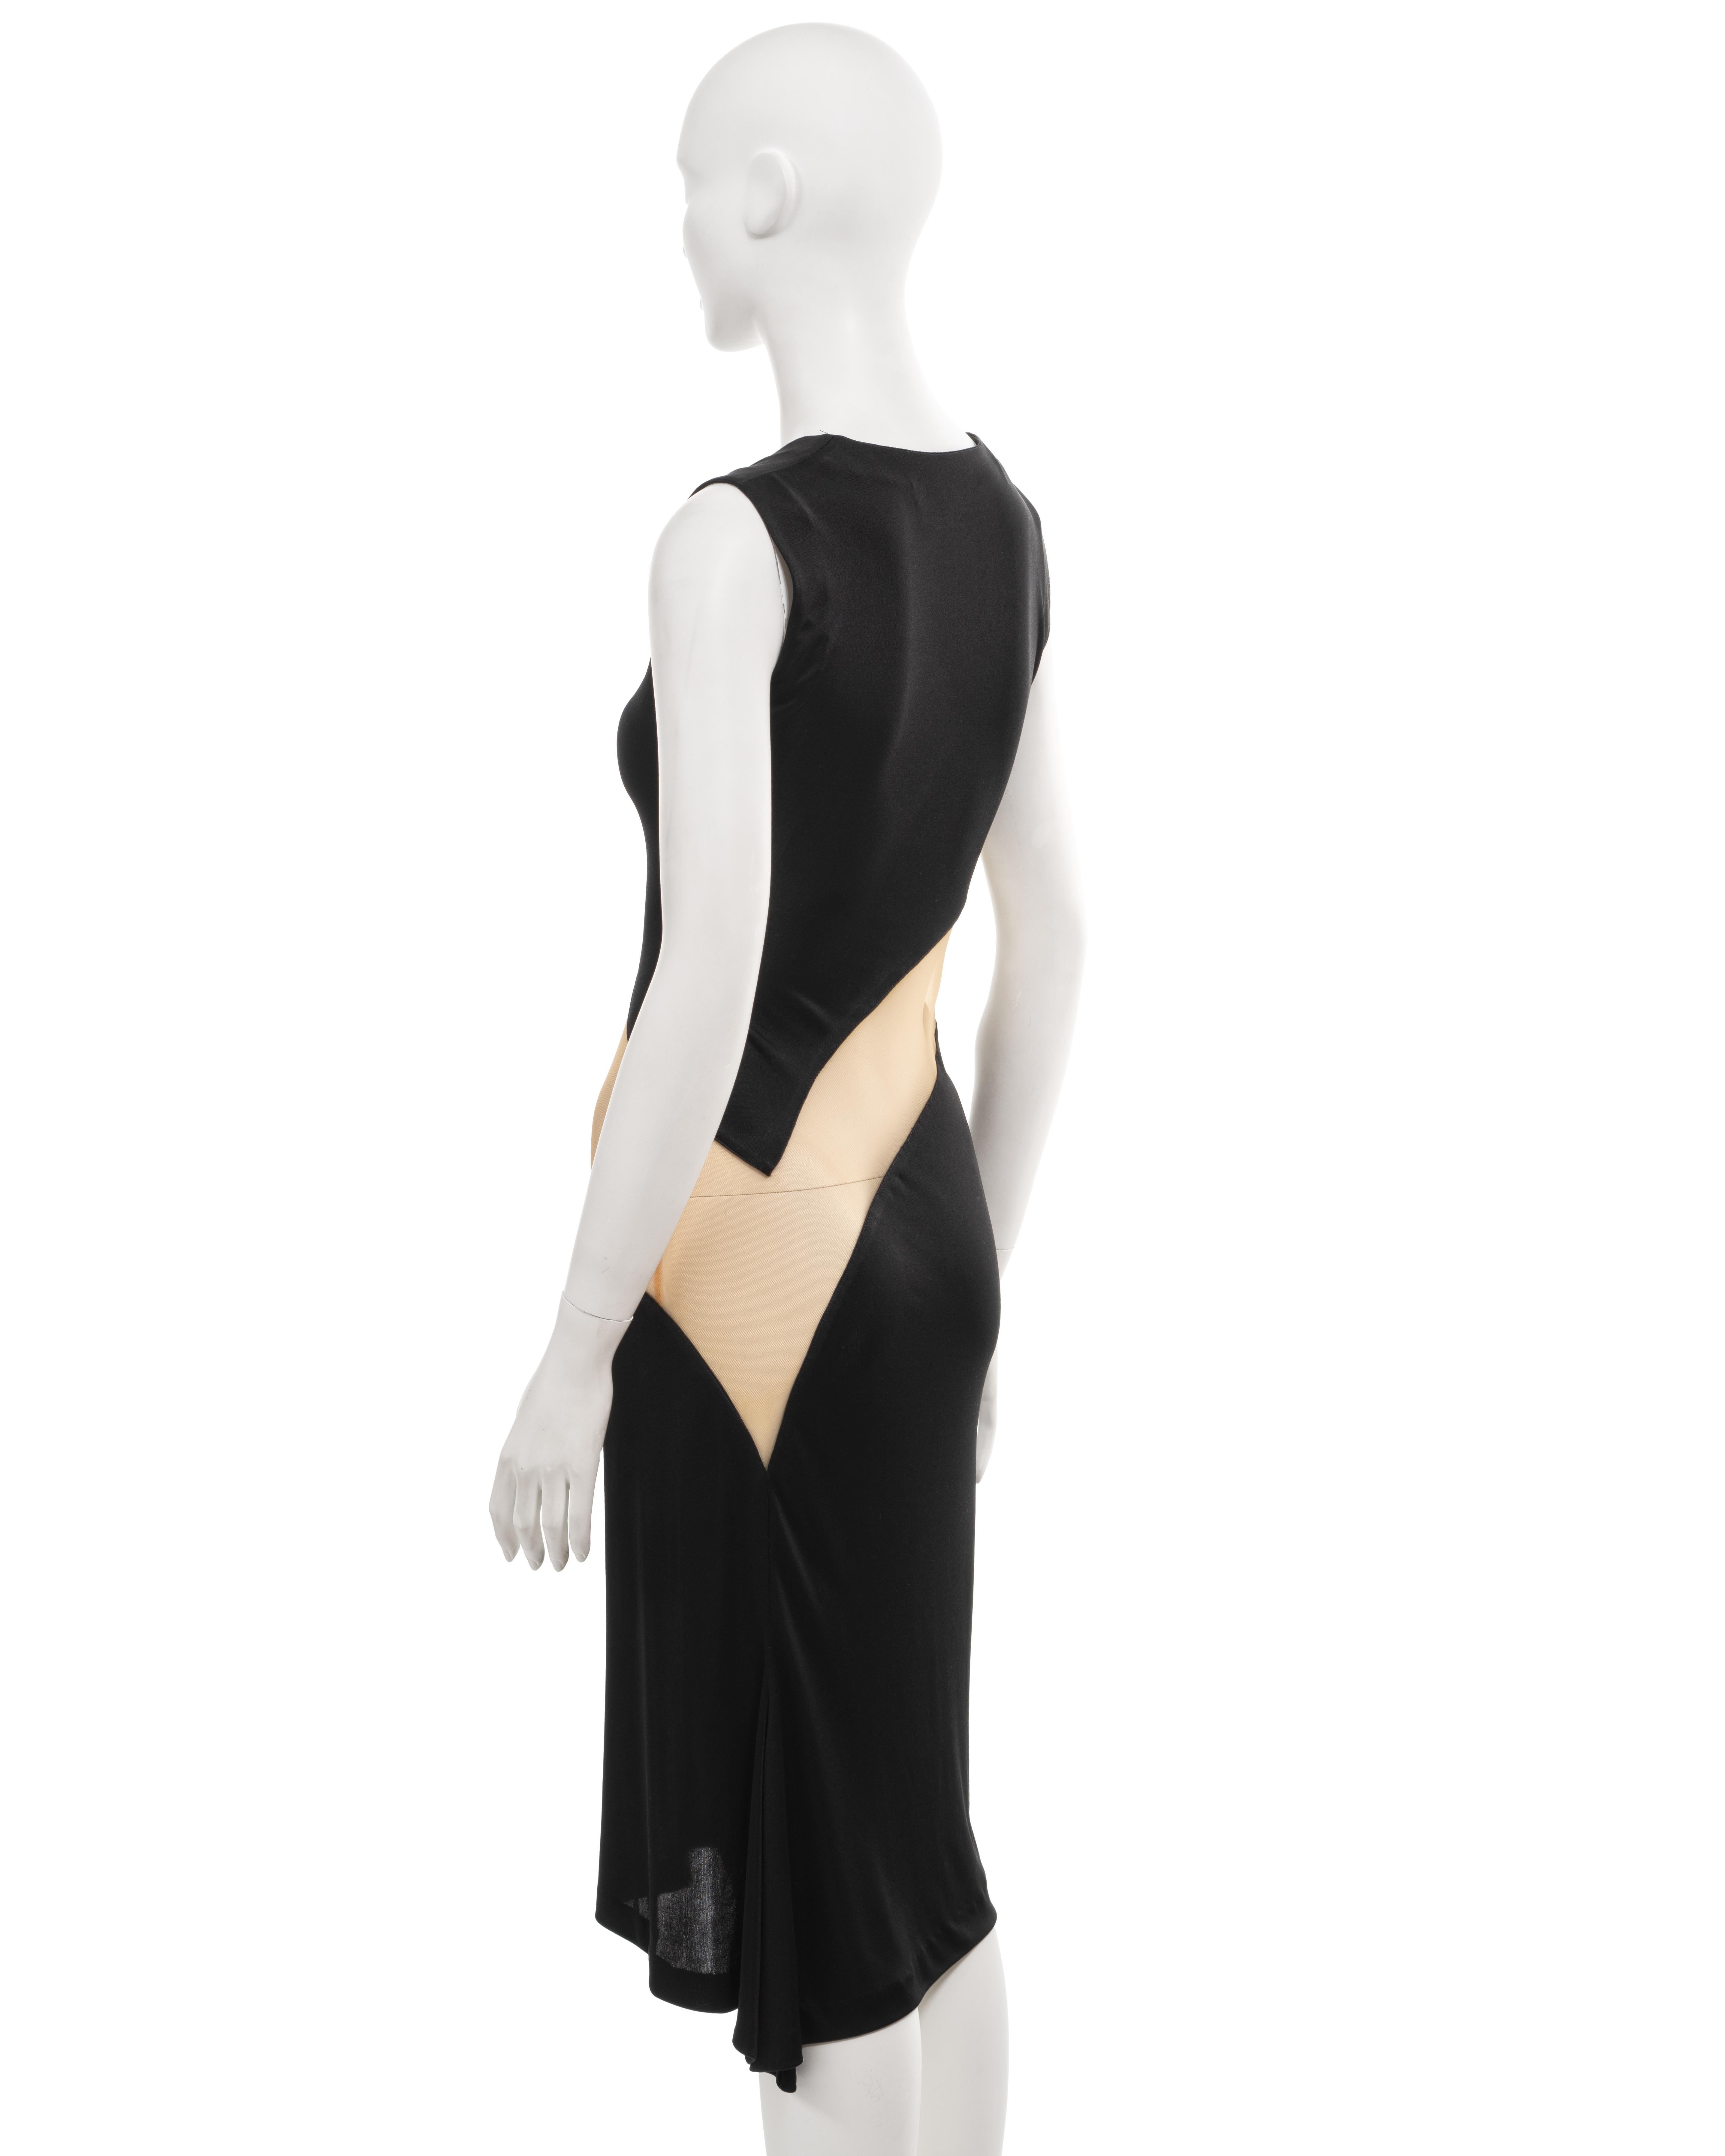 Alexander McQueen black acetate jersey dress with nude mesh insert, ss 1996 For Sale 5